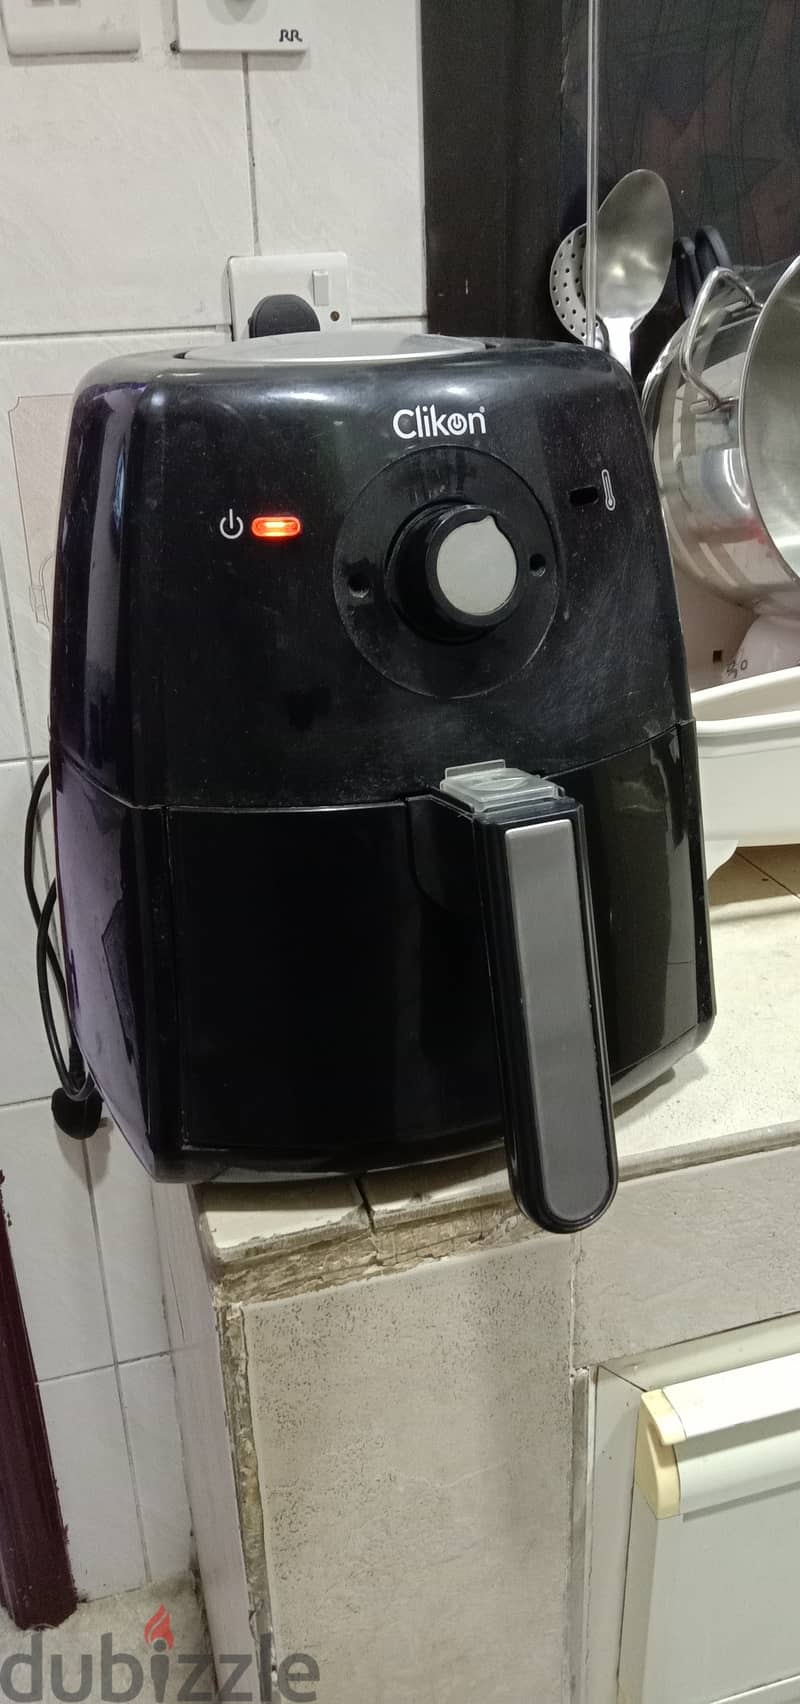 4 Sale Air Fryer in excellent condition 1